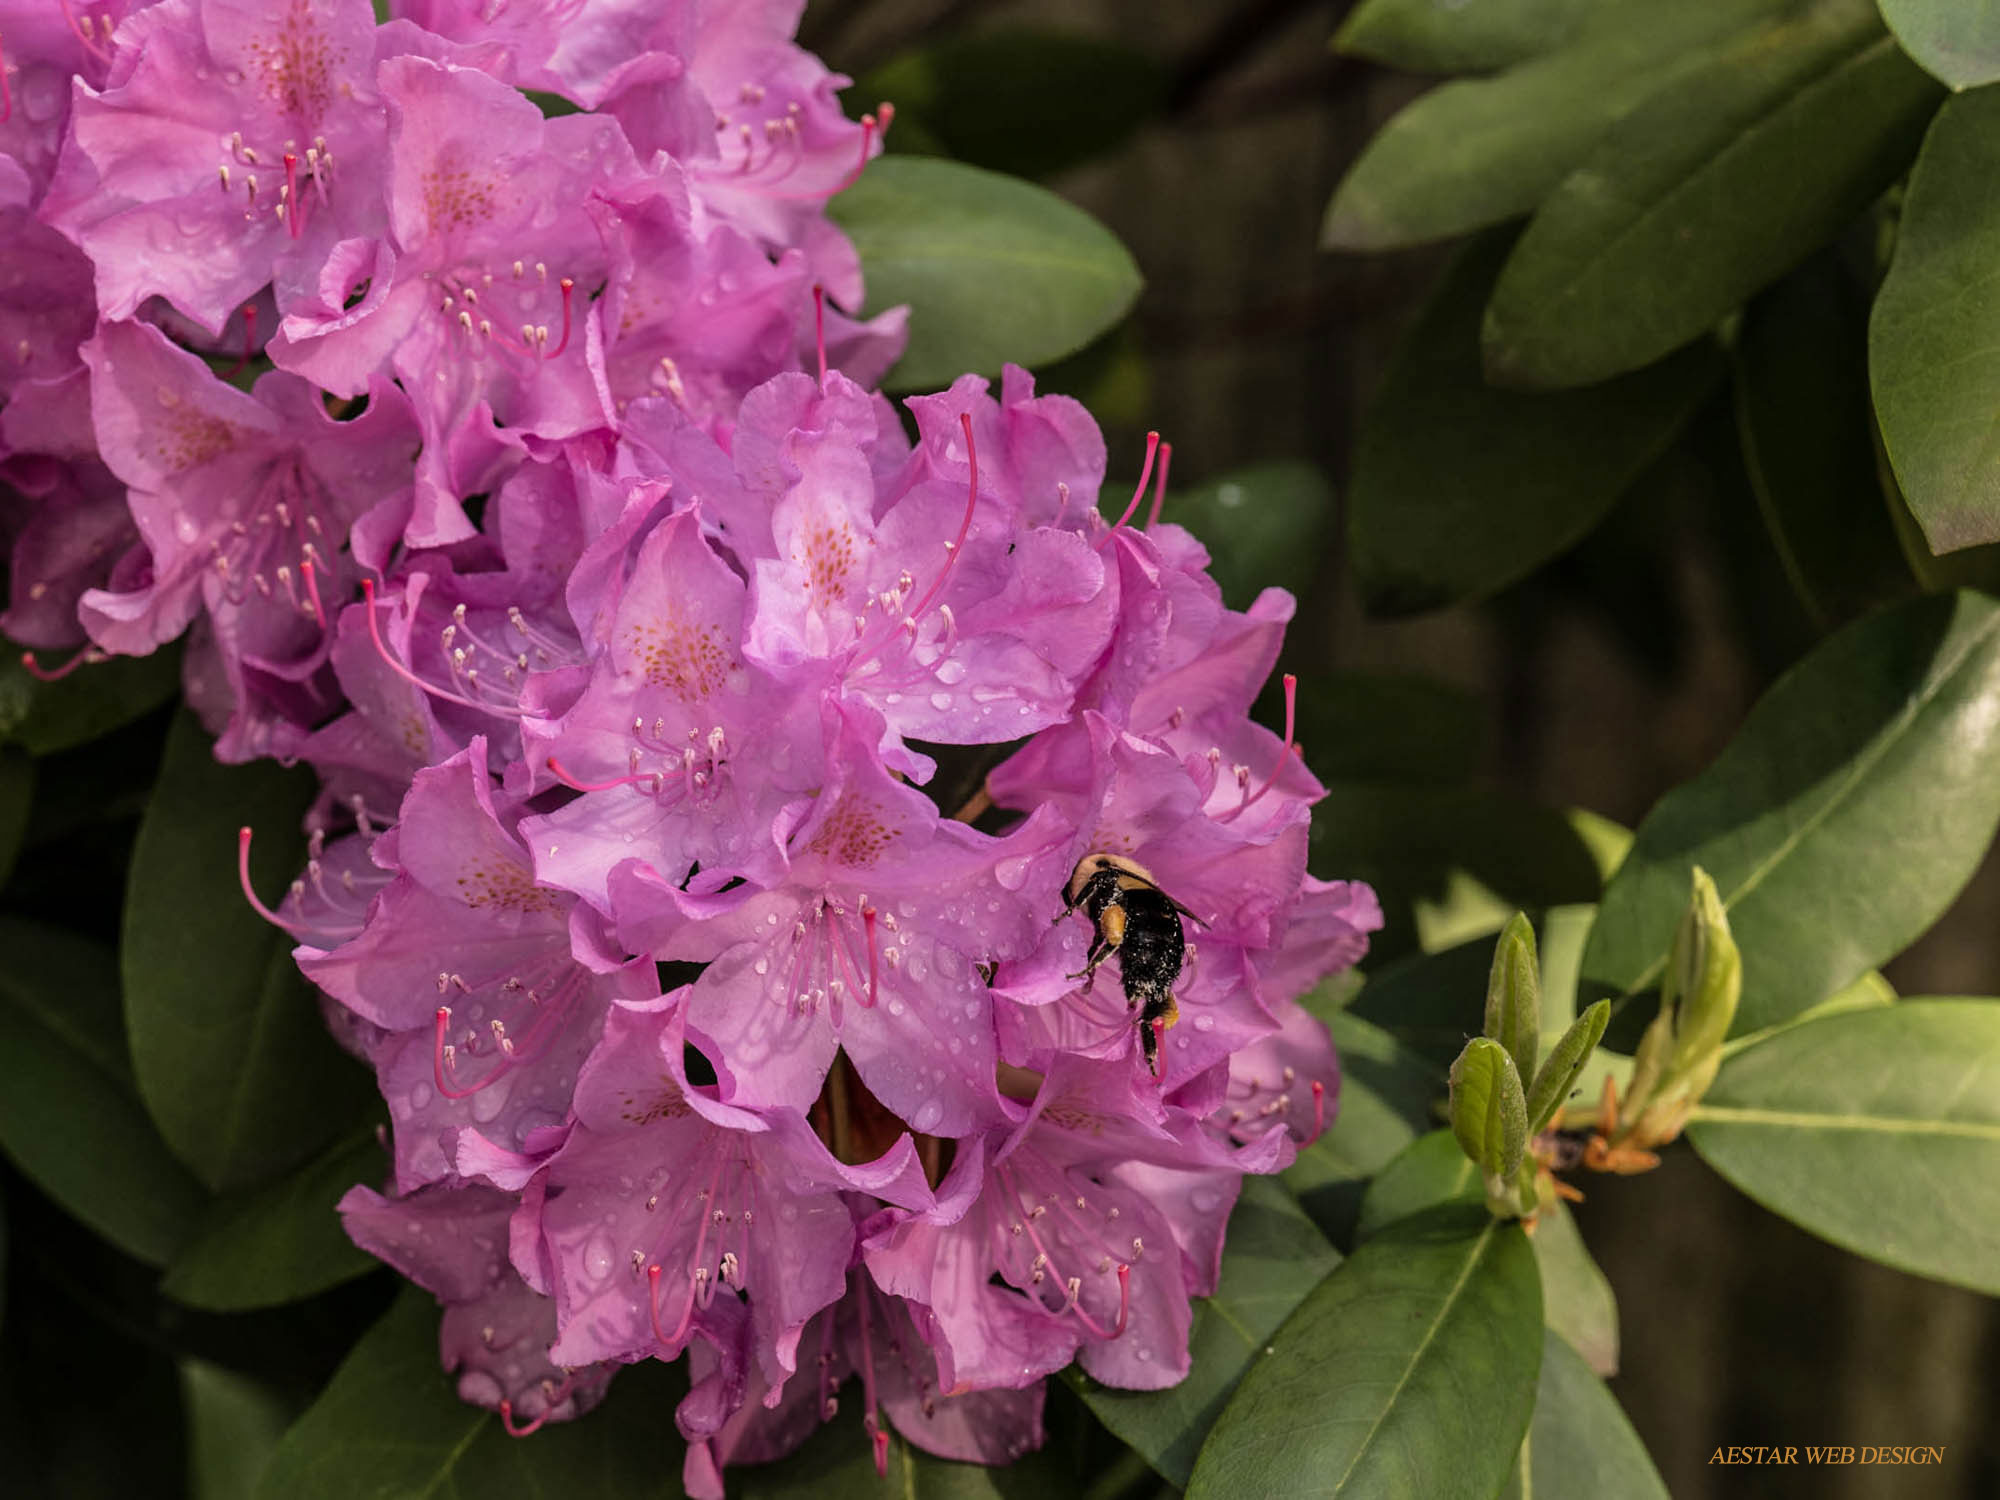 Web Product Photography, Flowers, Rhododendron, Rhodies, New York City